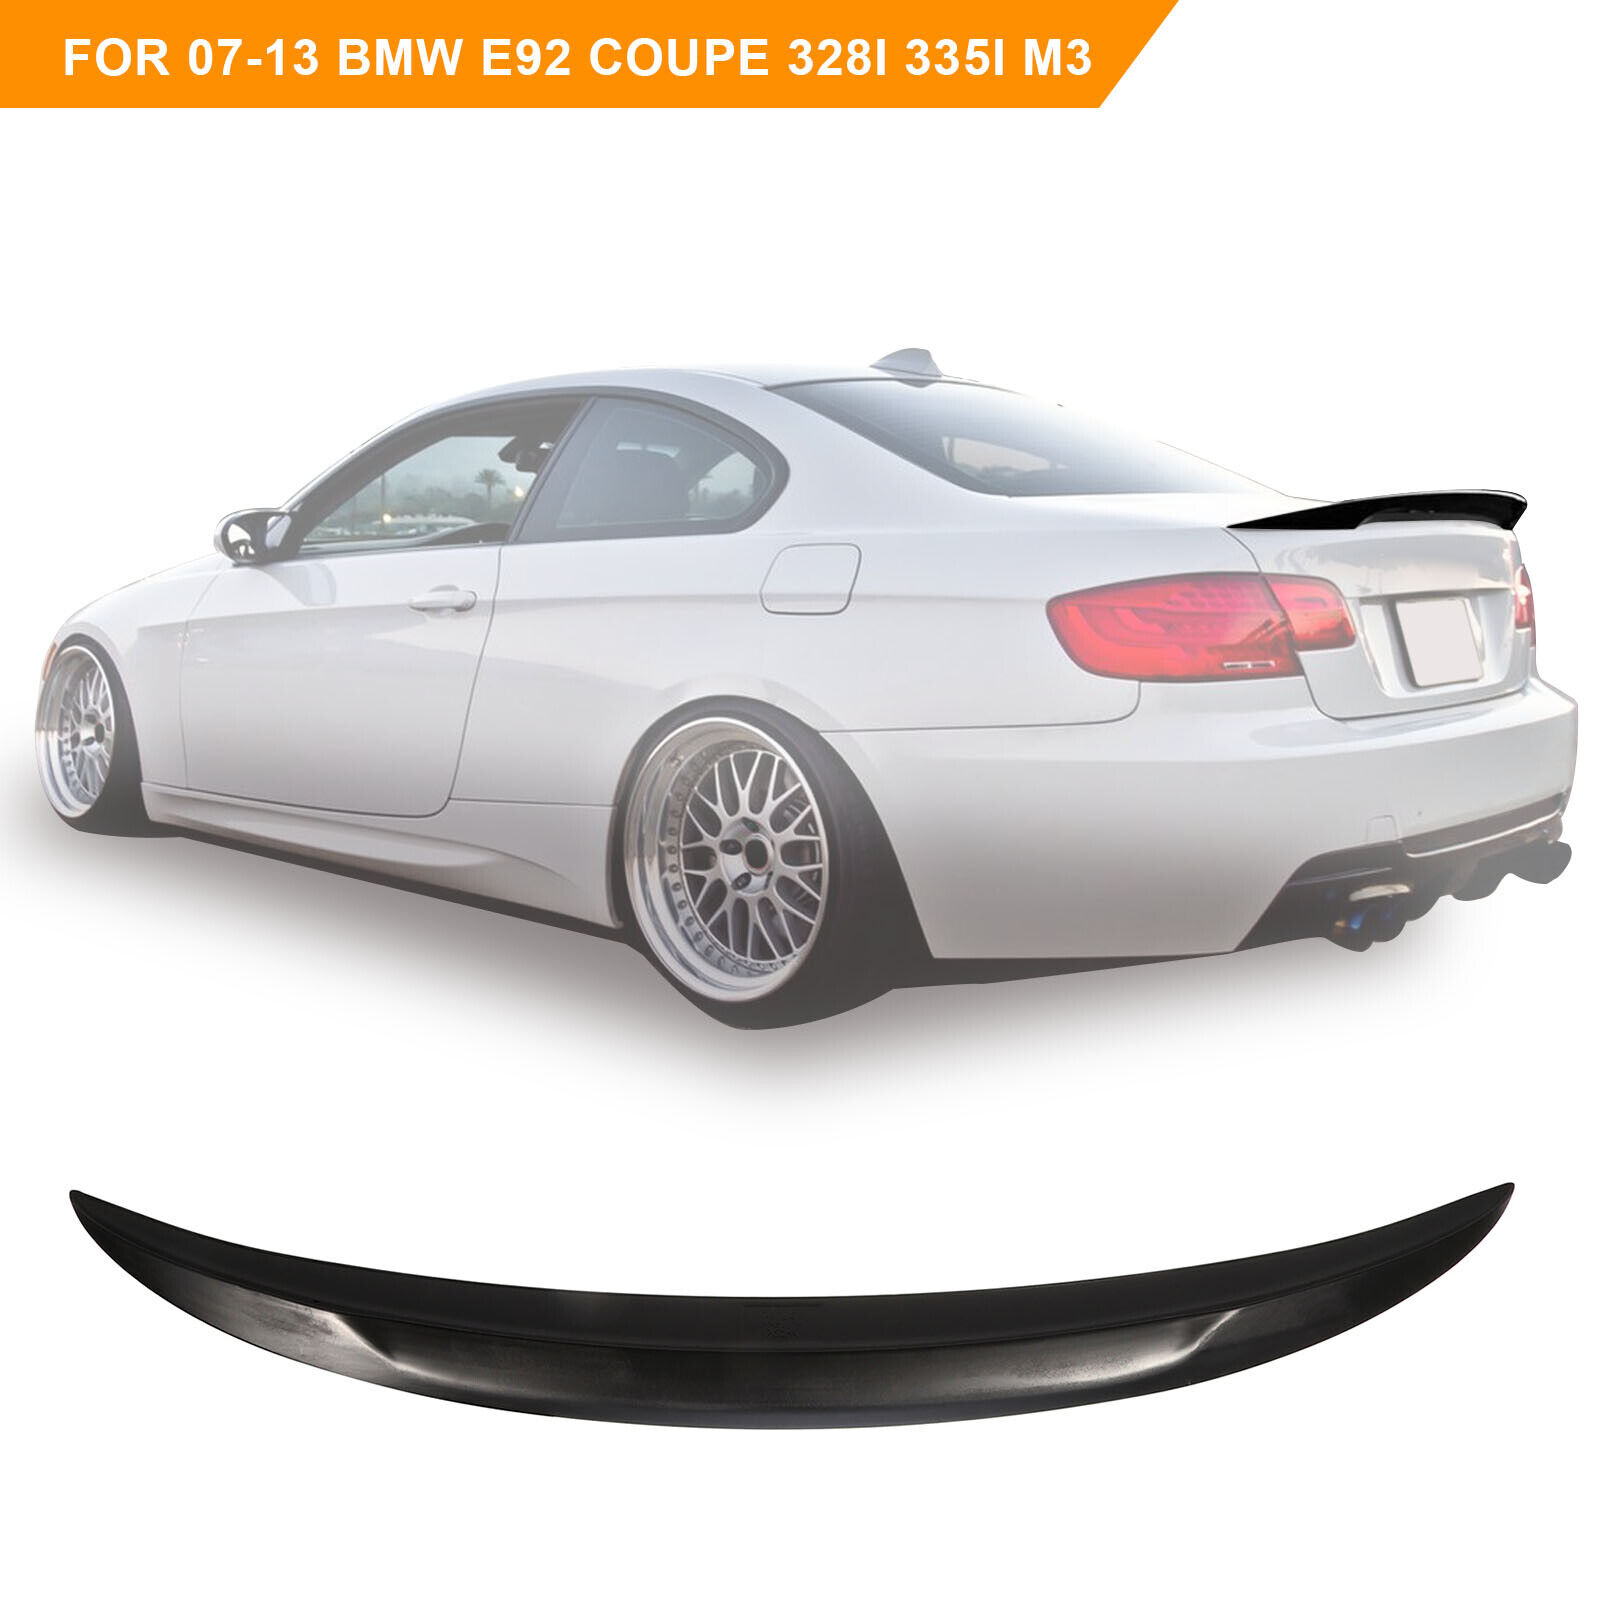 MIROZO Spoiler Wing For 2007-2013 BMW E92 Coupe 328i 335i M3 High Kick Trunk ABS